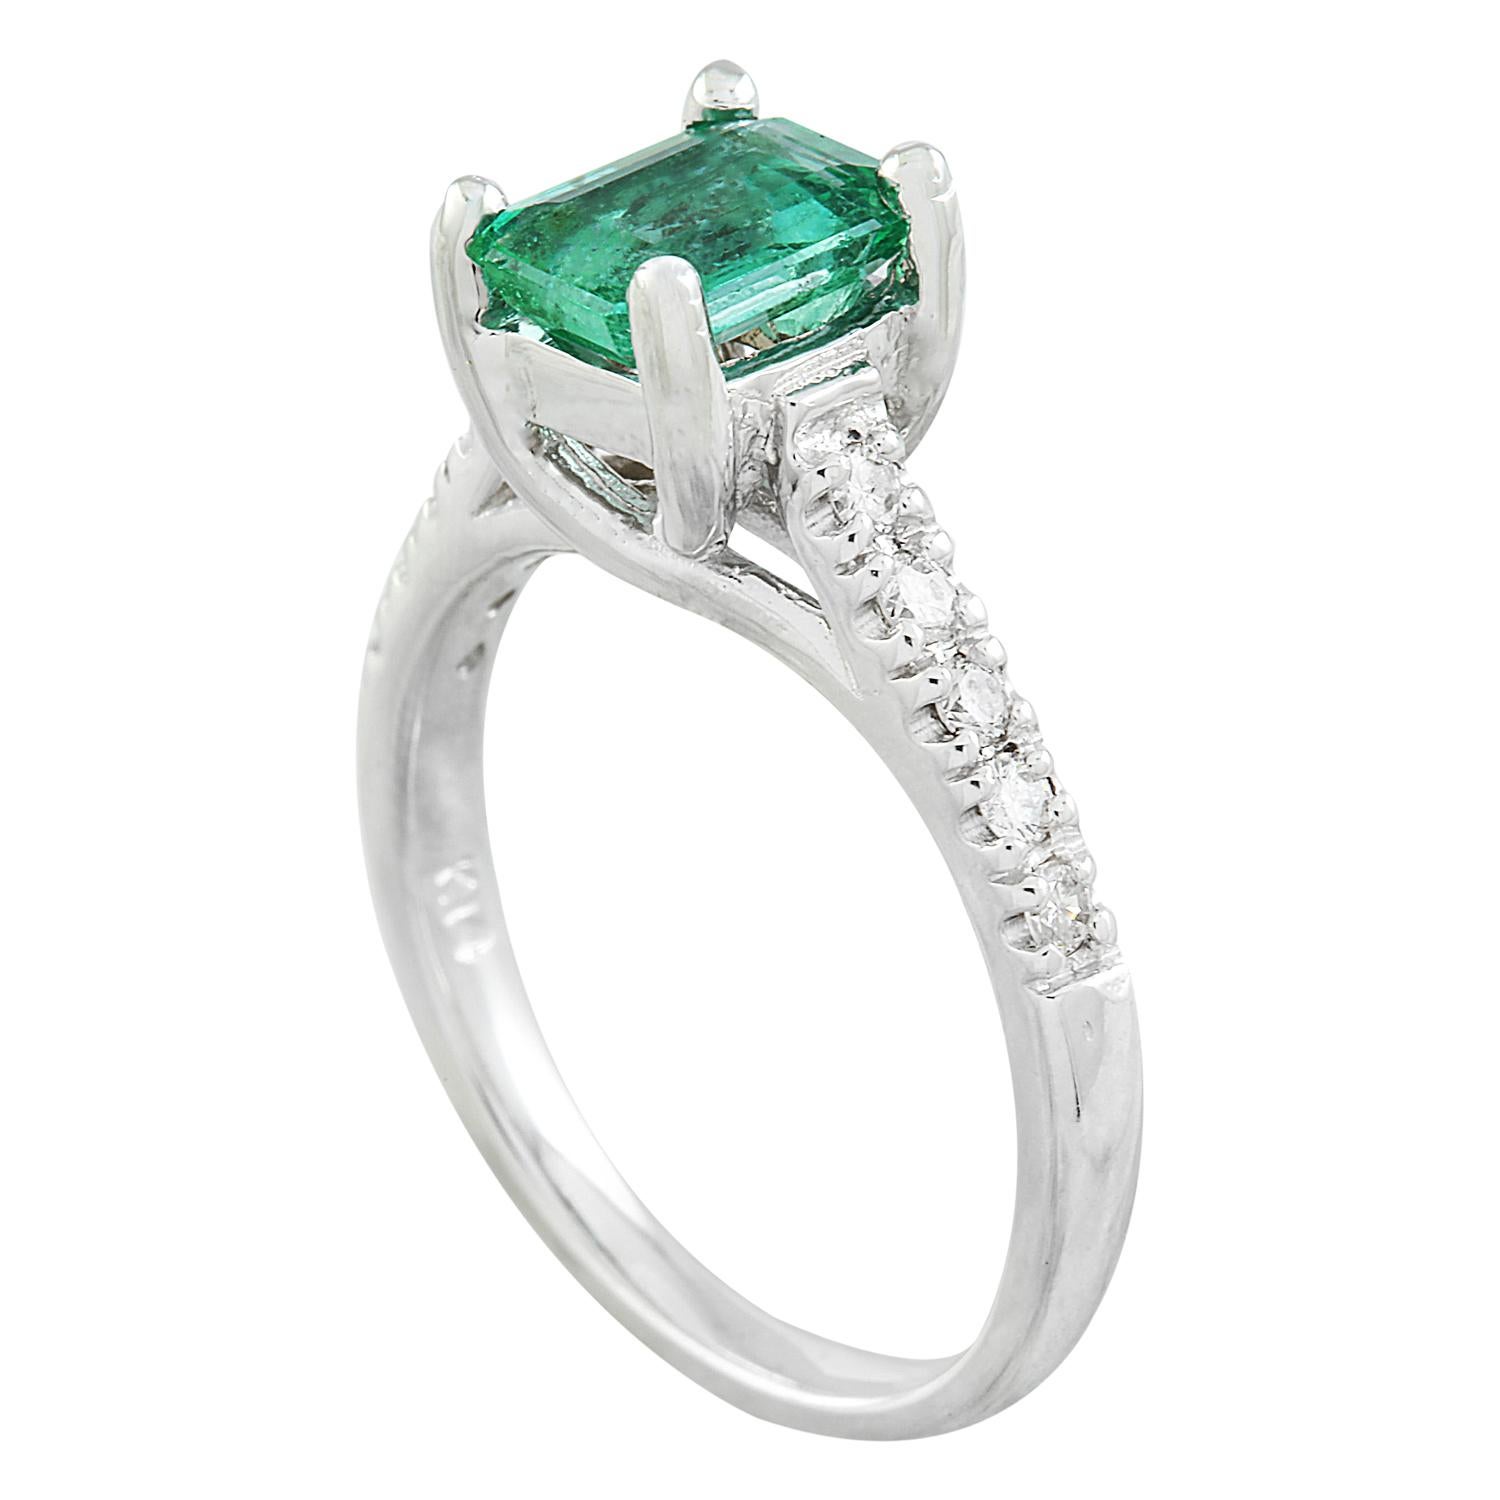 Step into elegance with our enchanting 1.47 Carat Natural Emerald 14 Karat Solid White Gold Diamond Ring. Crafted to perfection this ring is a true testament to sophistication.

At its heart lies a mesmerizing natural emerald, weighing 1.22 carats